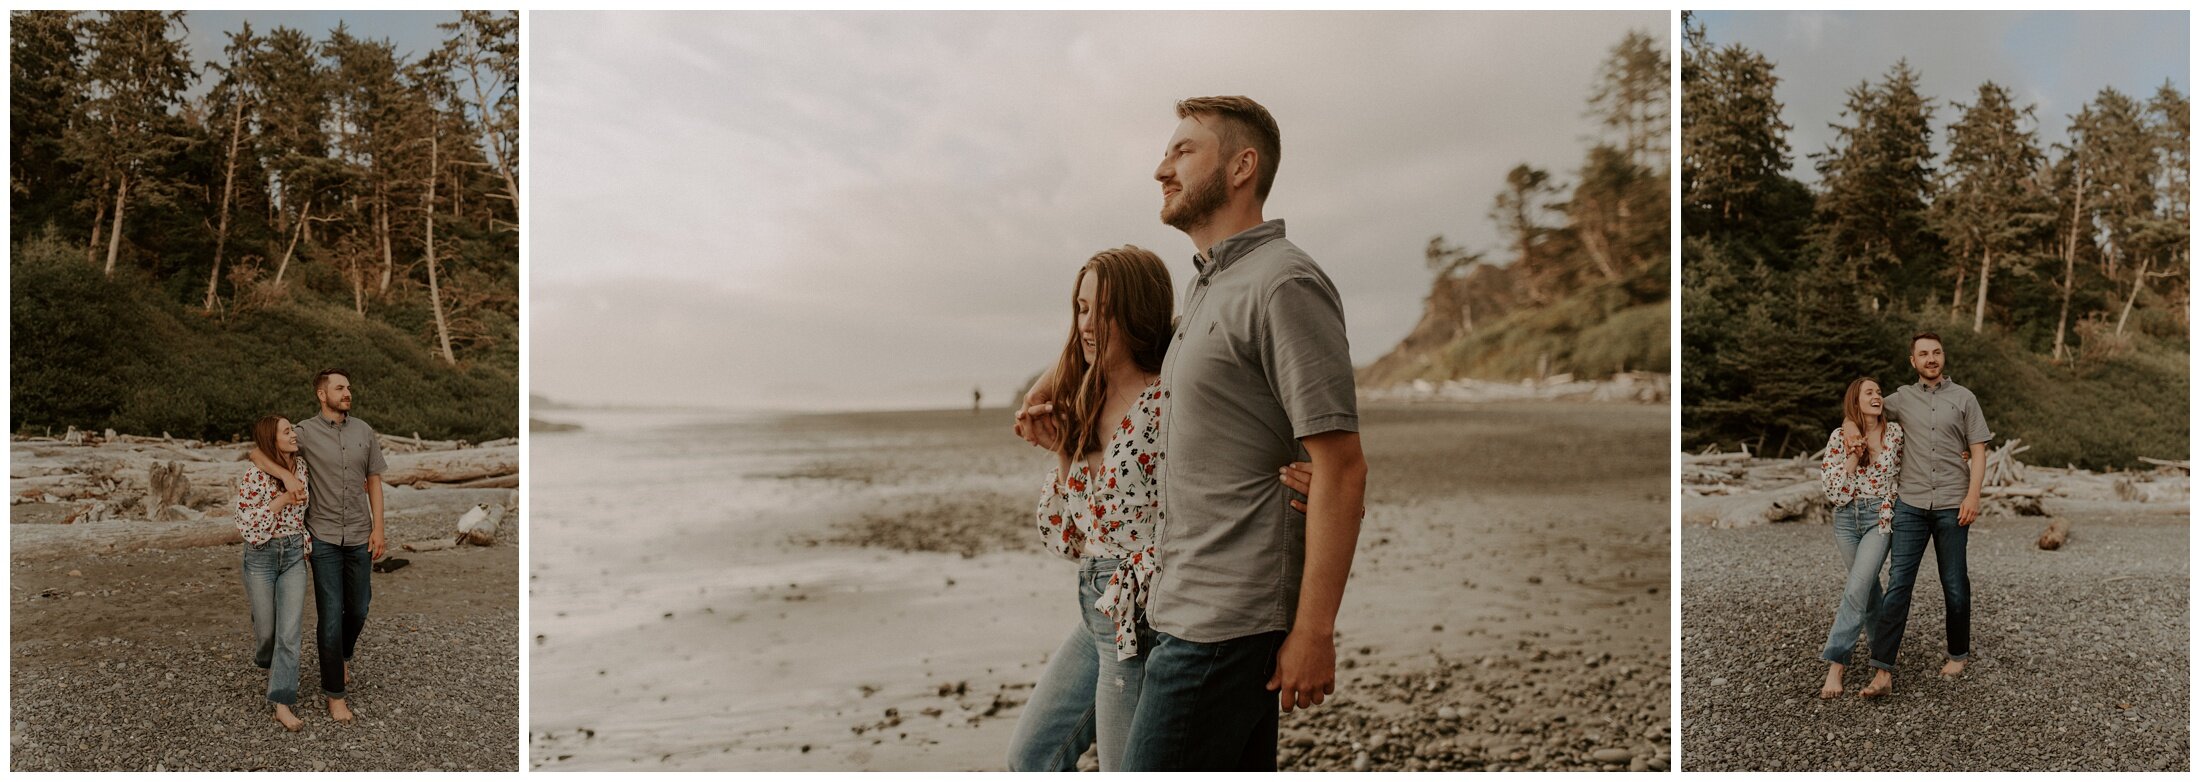 Ruby Beach Engagement Session by Jessica Heron Images_0007.jpg